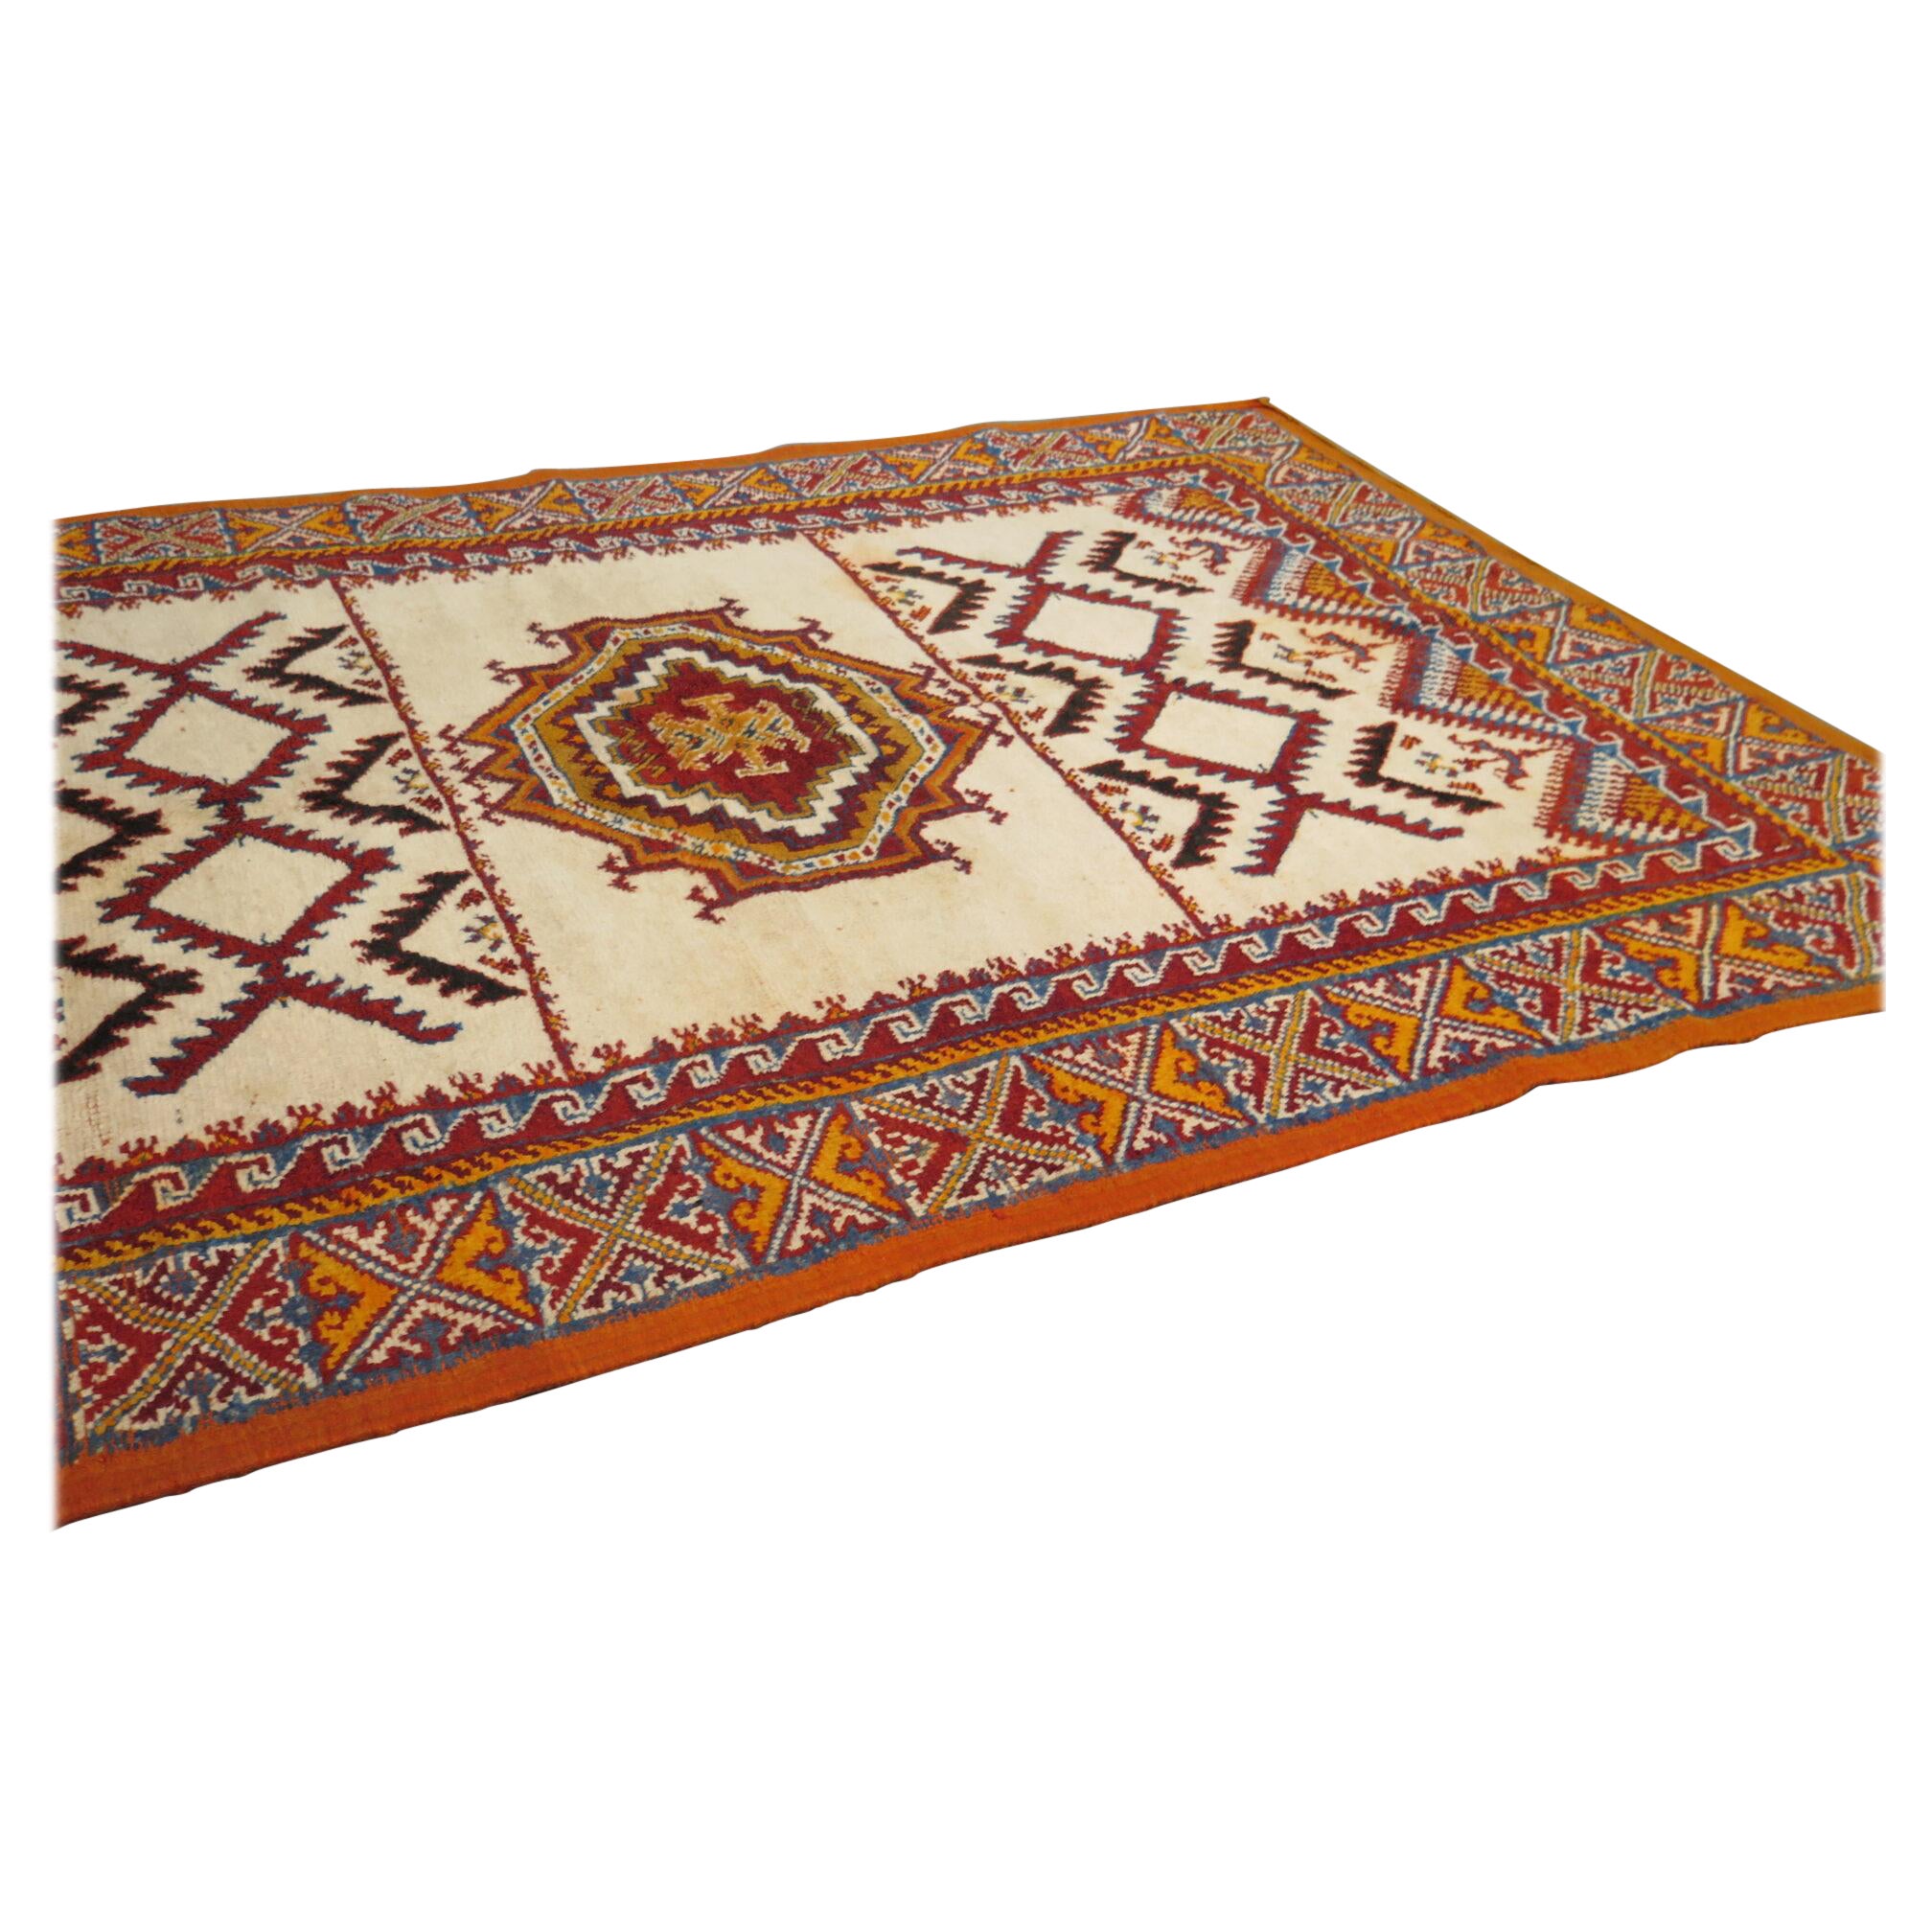 Early 20th Century Moroccan Berber Accent Rug